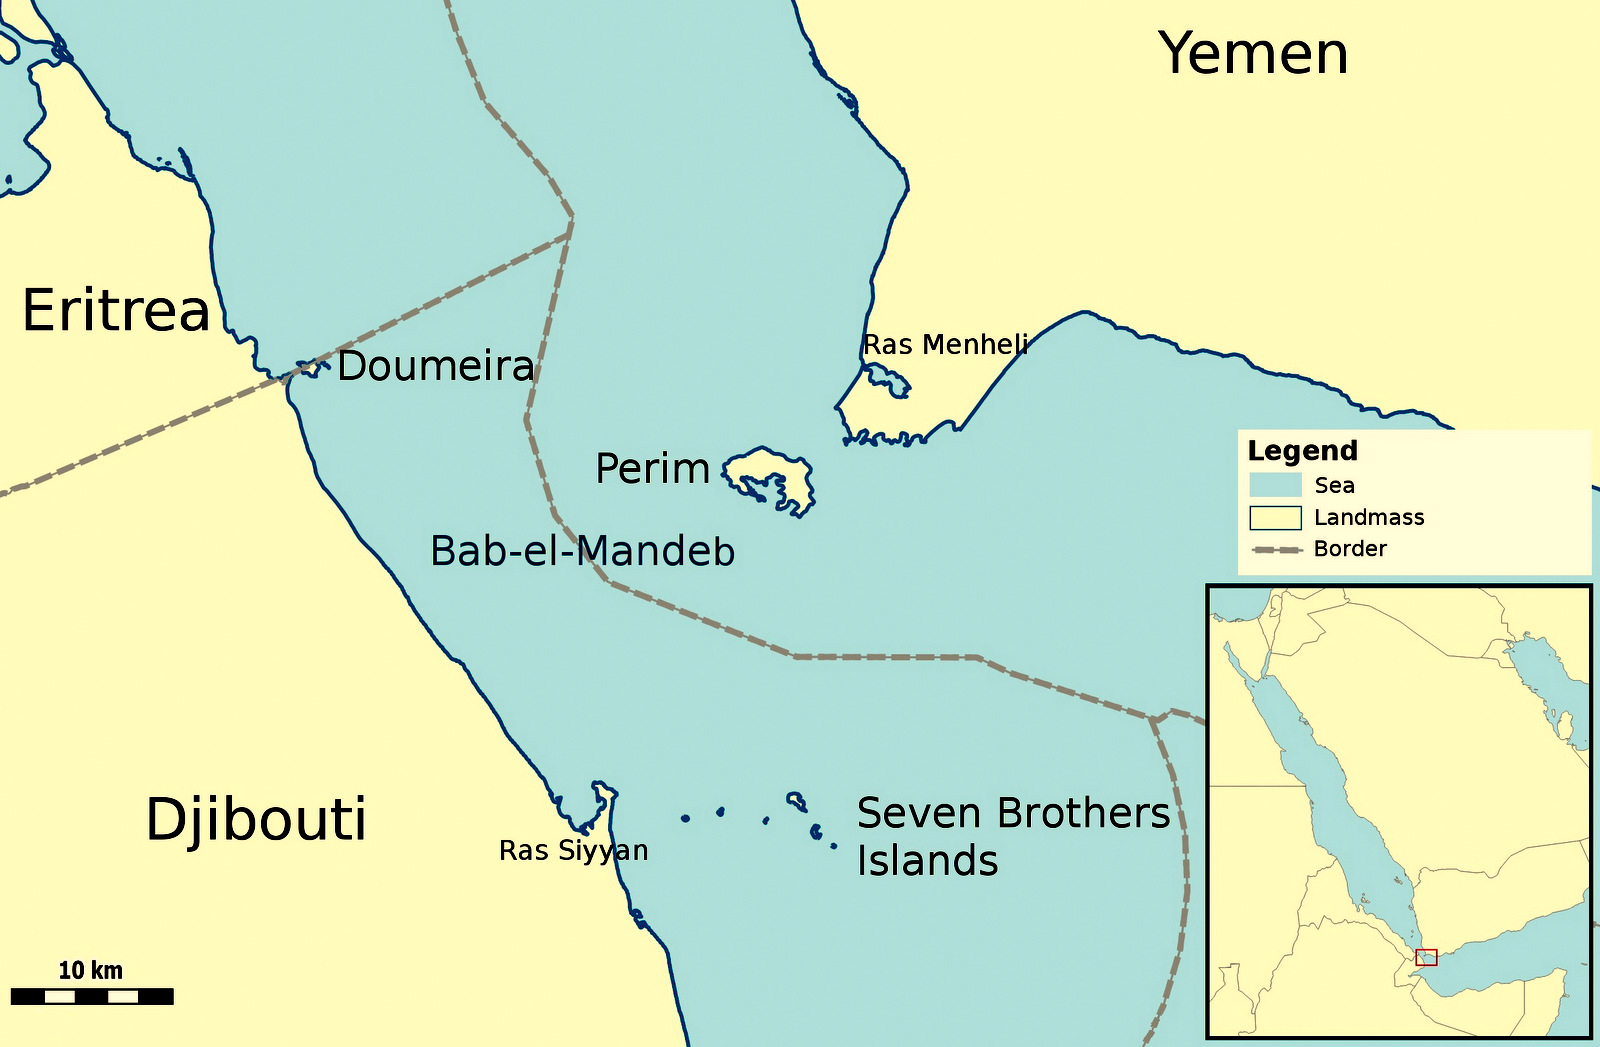 A Map of Bab-el-Mandeb, the world’s primary oil route connecting the Red Sea to the Aiden Sea.